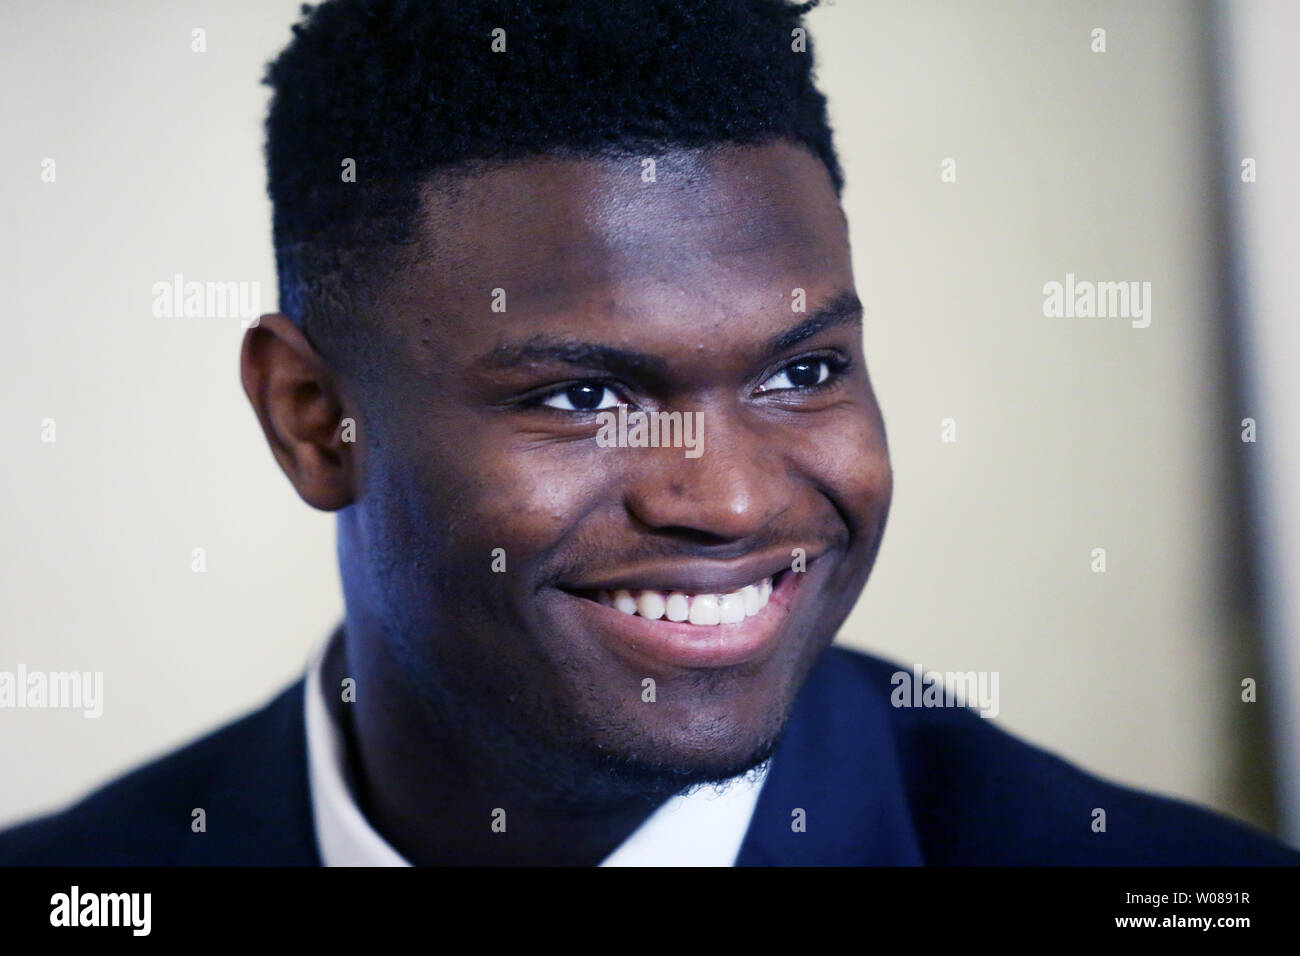 Zion Williamson of Duke University smiles as he talks with reporters before ceremonies at the Missouri Athletic Club in St. Louis on April 15, 2019. Williamson, a freshman was the winner of the Wayman Tisdale Freshman of the Year and Oscar Robertson Player of the Year awards. Williamson made it official and announced his intentions to enter the 2019 NBA Draft.  Photo by Bill Greenblatt/UPI Stock Photo